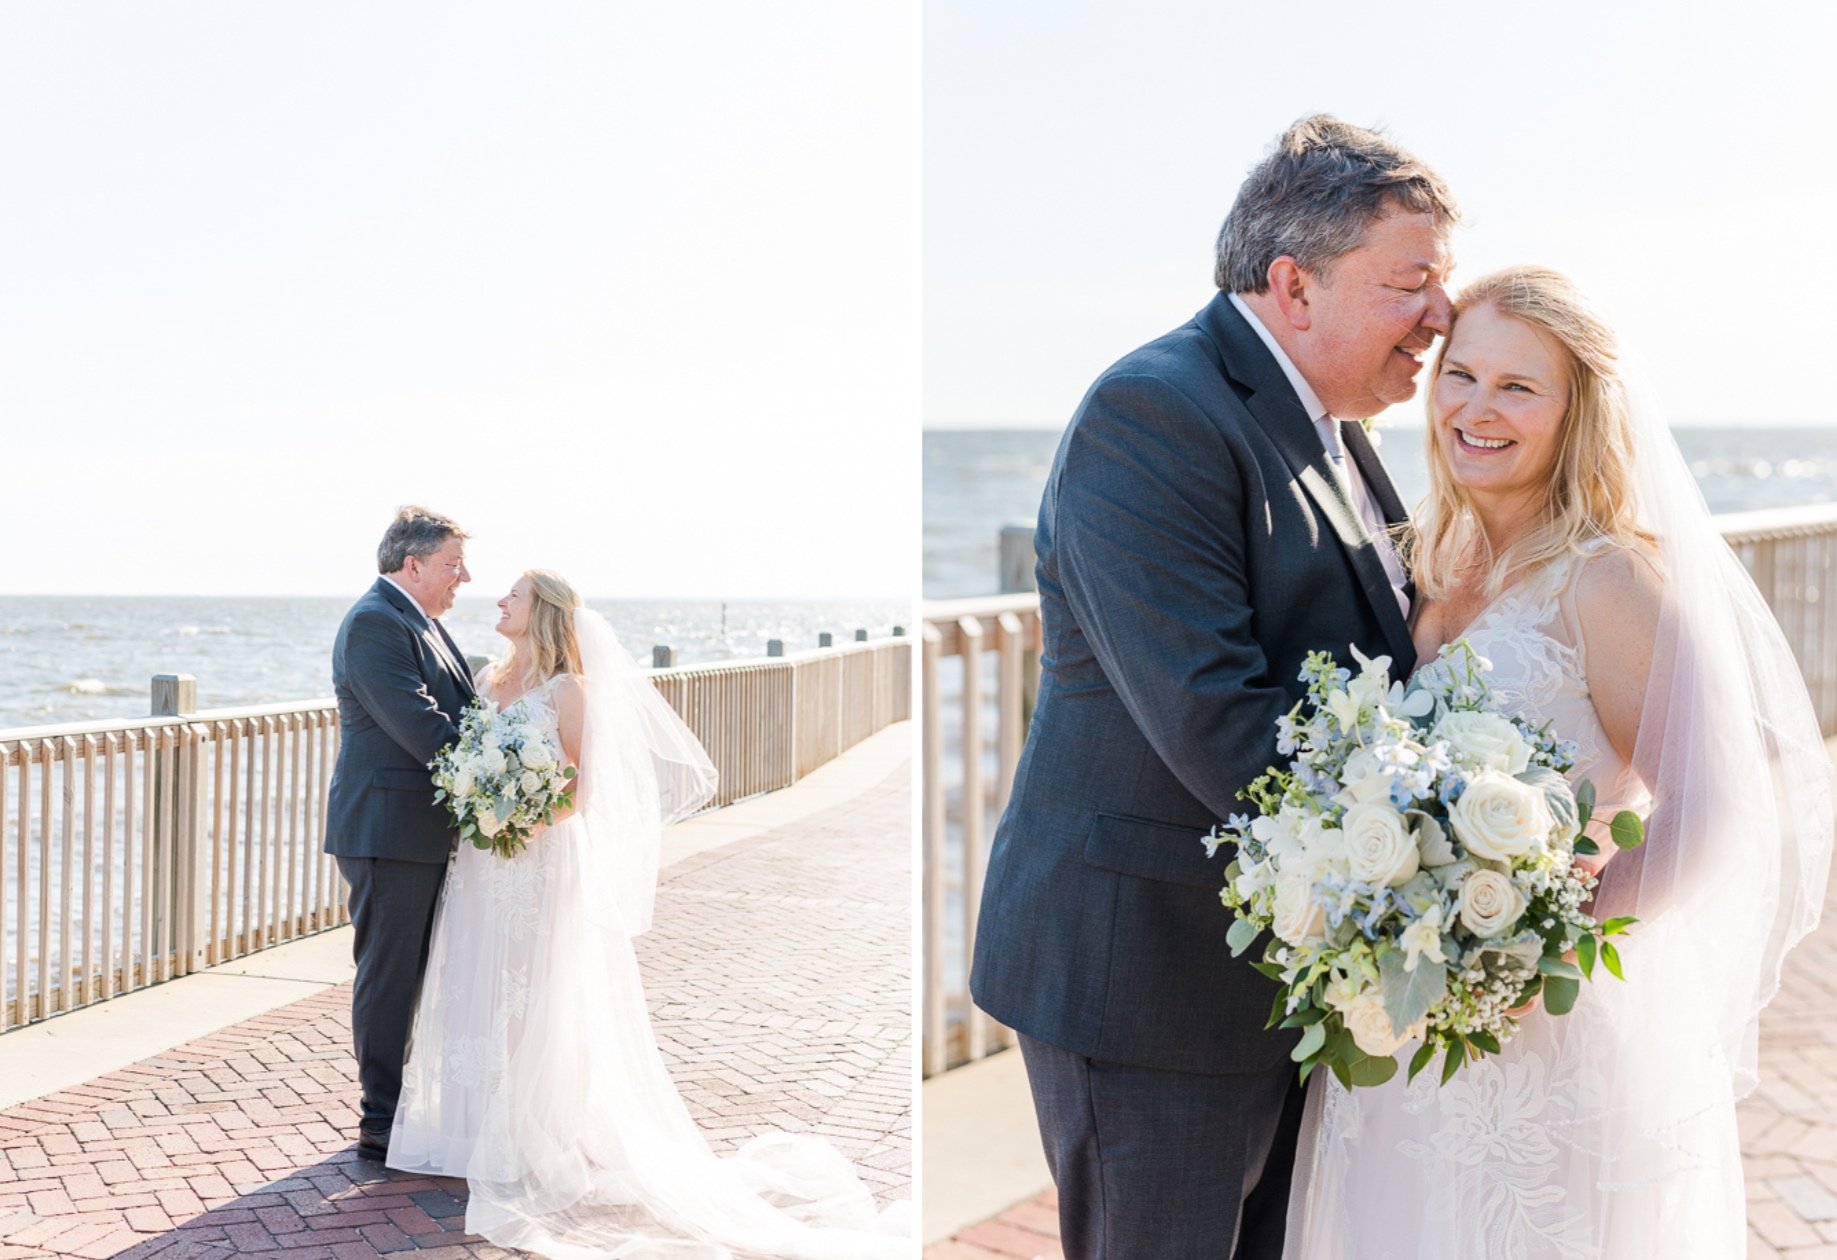 Fairhope Alabama Wedding in July | The Grand Hotel | St. Francis at the Point Wedding | The Wash House | Photographed by Kristen Marcus Photography